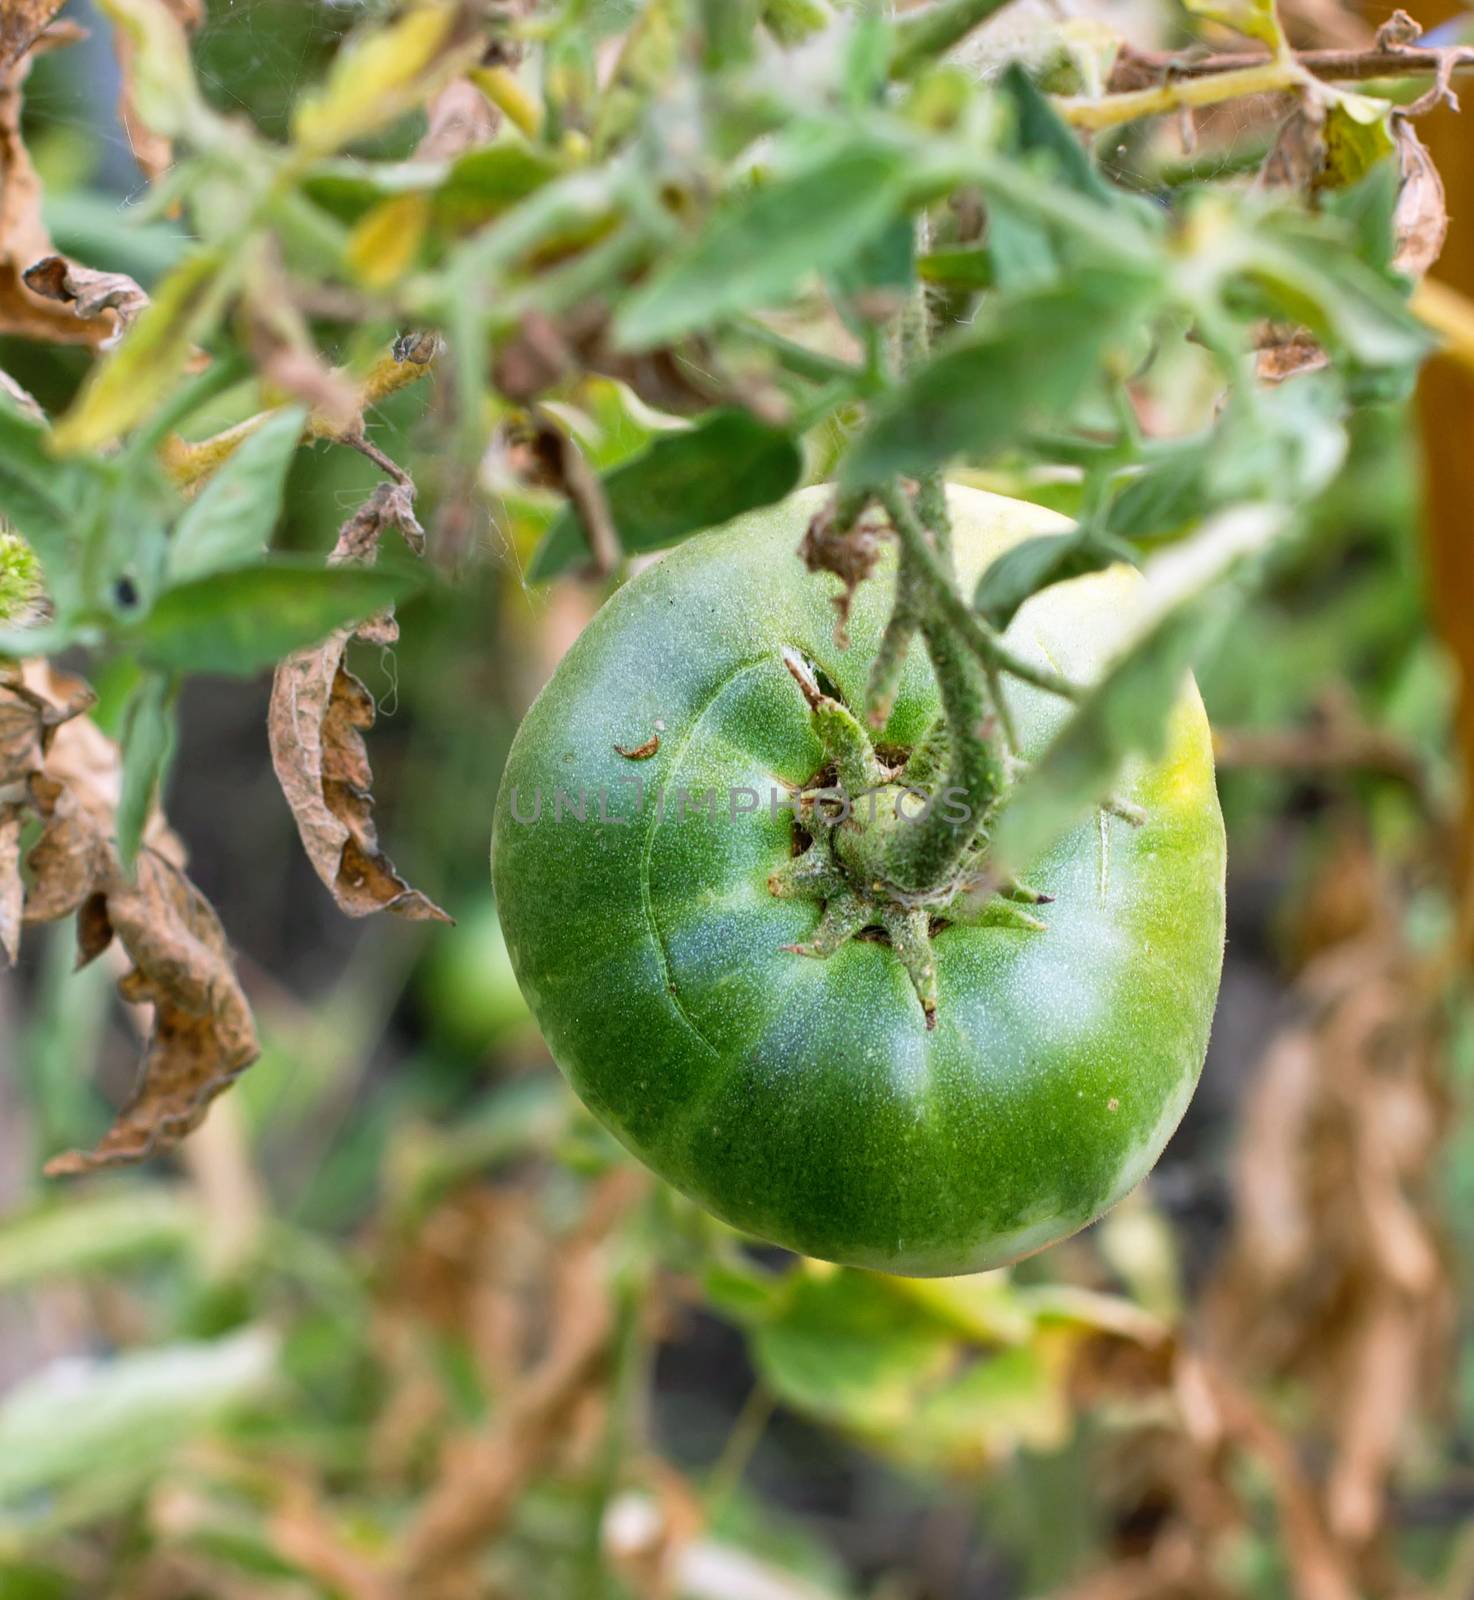 green tomatoes in the garden hanging on a branch by KoliadzynskaIryna